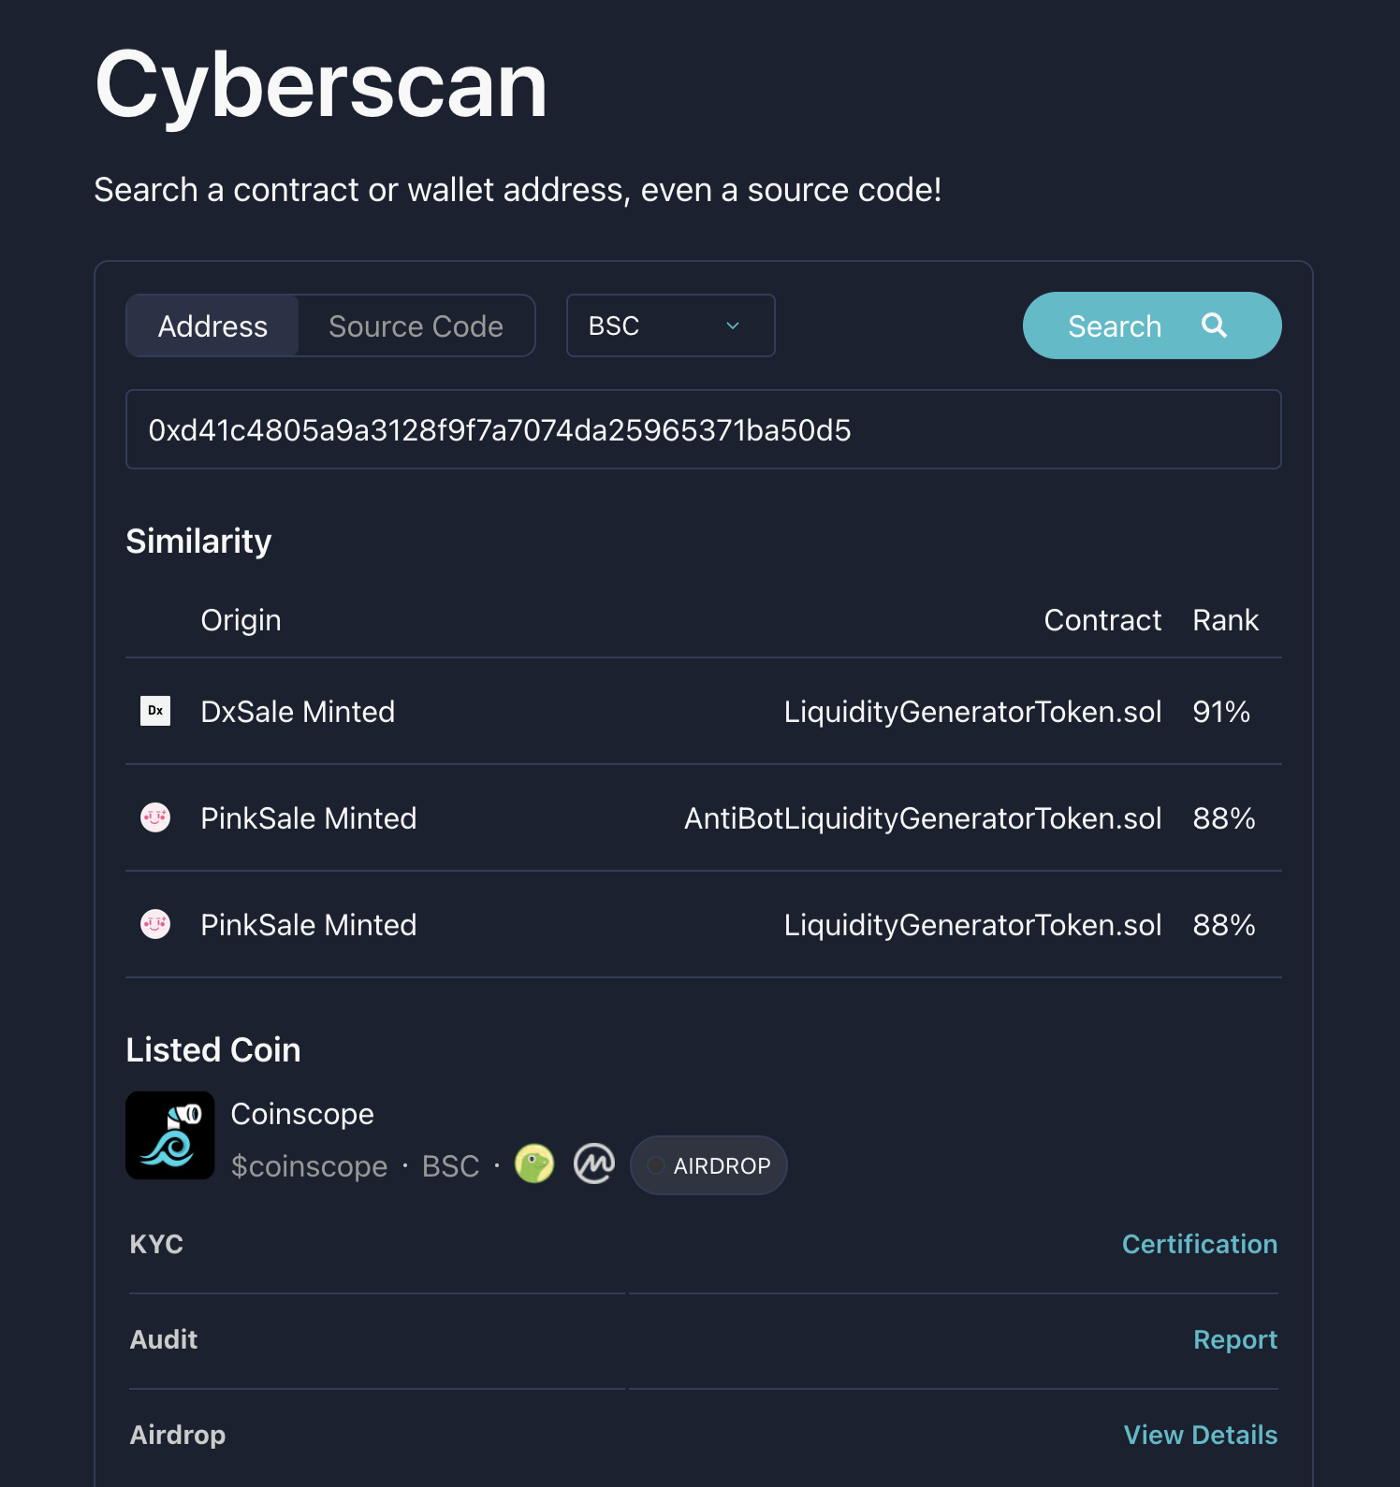 Results of the Cyberscan Contract Tool